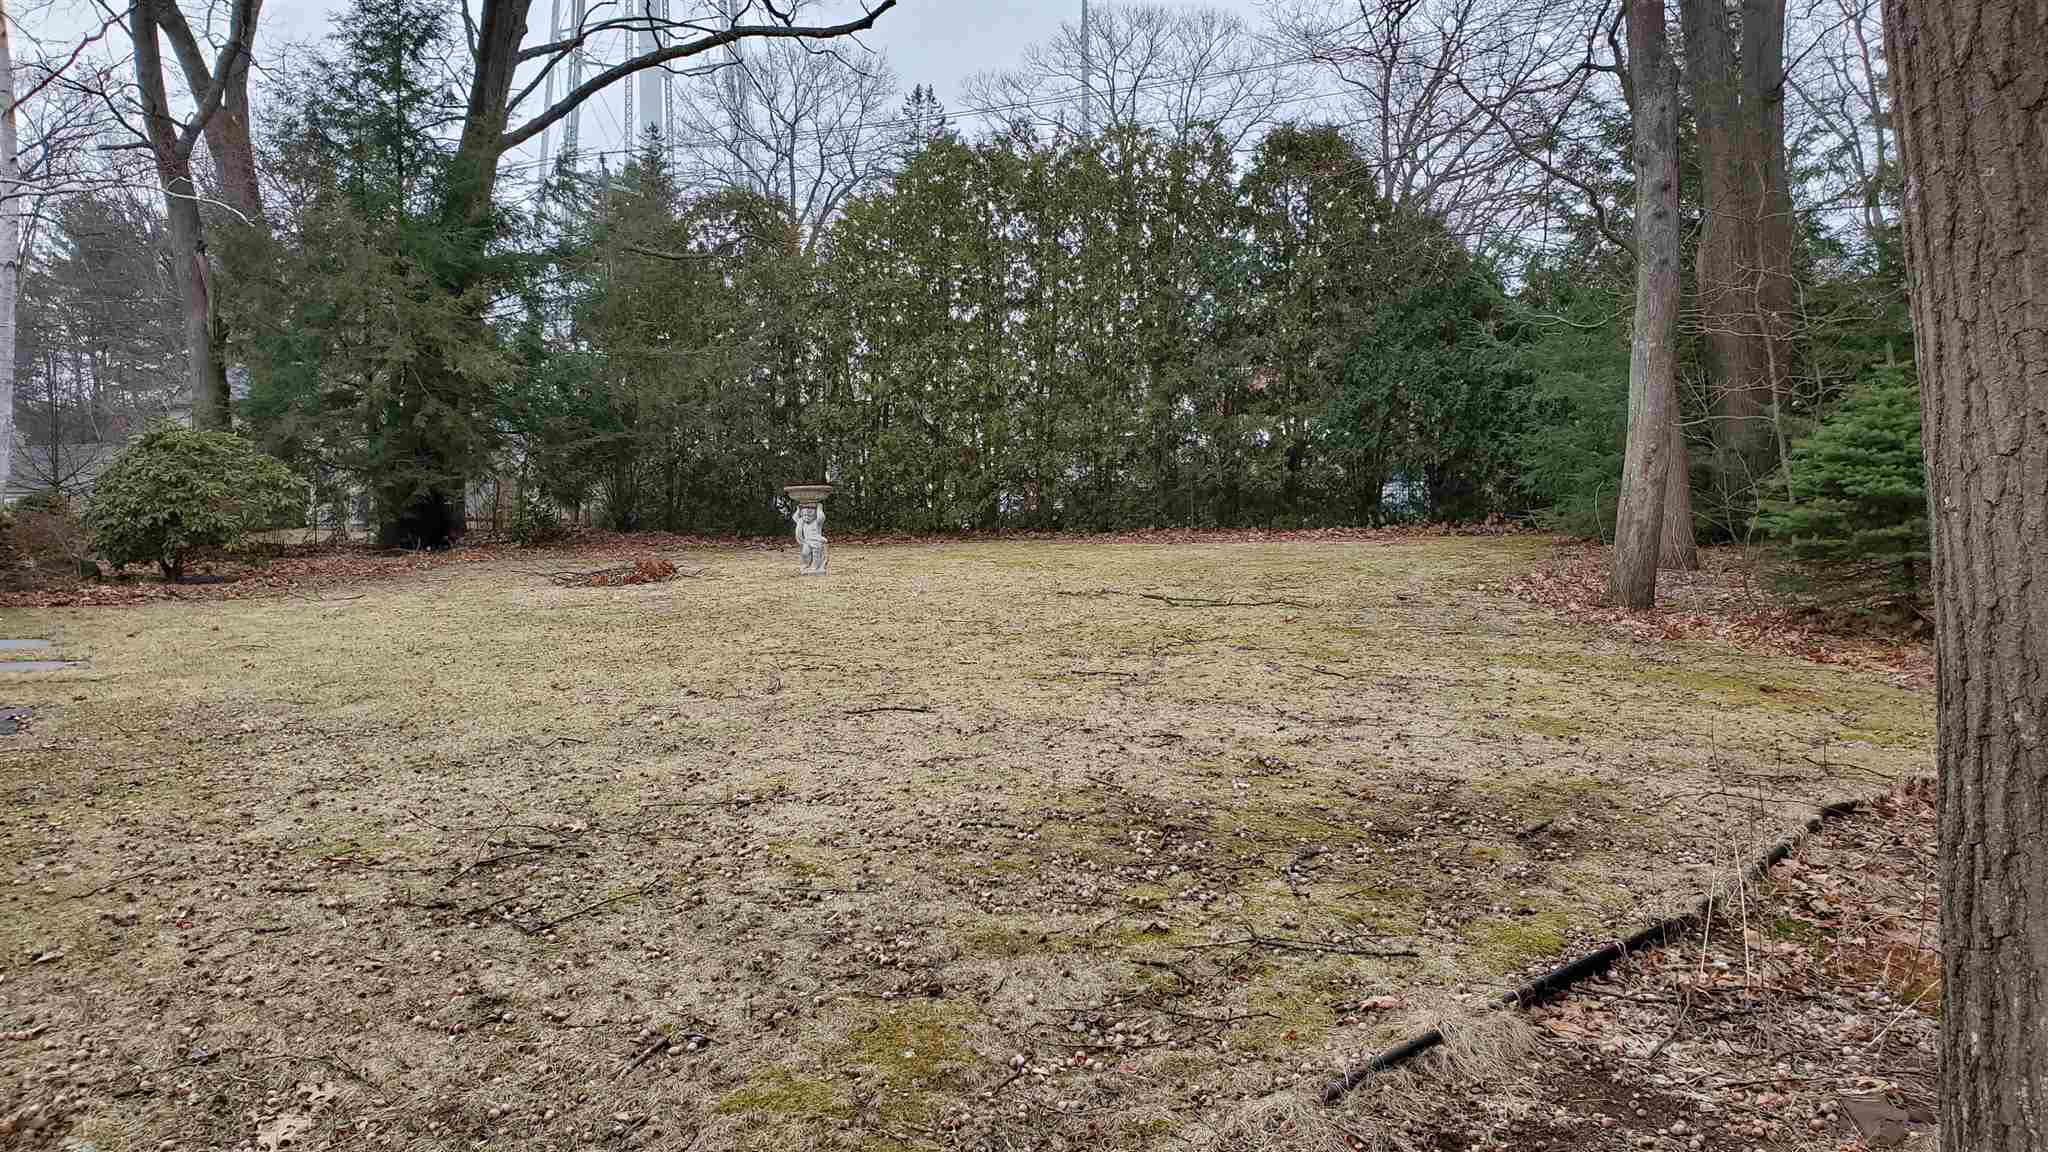  Hillhaven RoadMap-922 Lot-22  Manchester, NH Photo